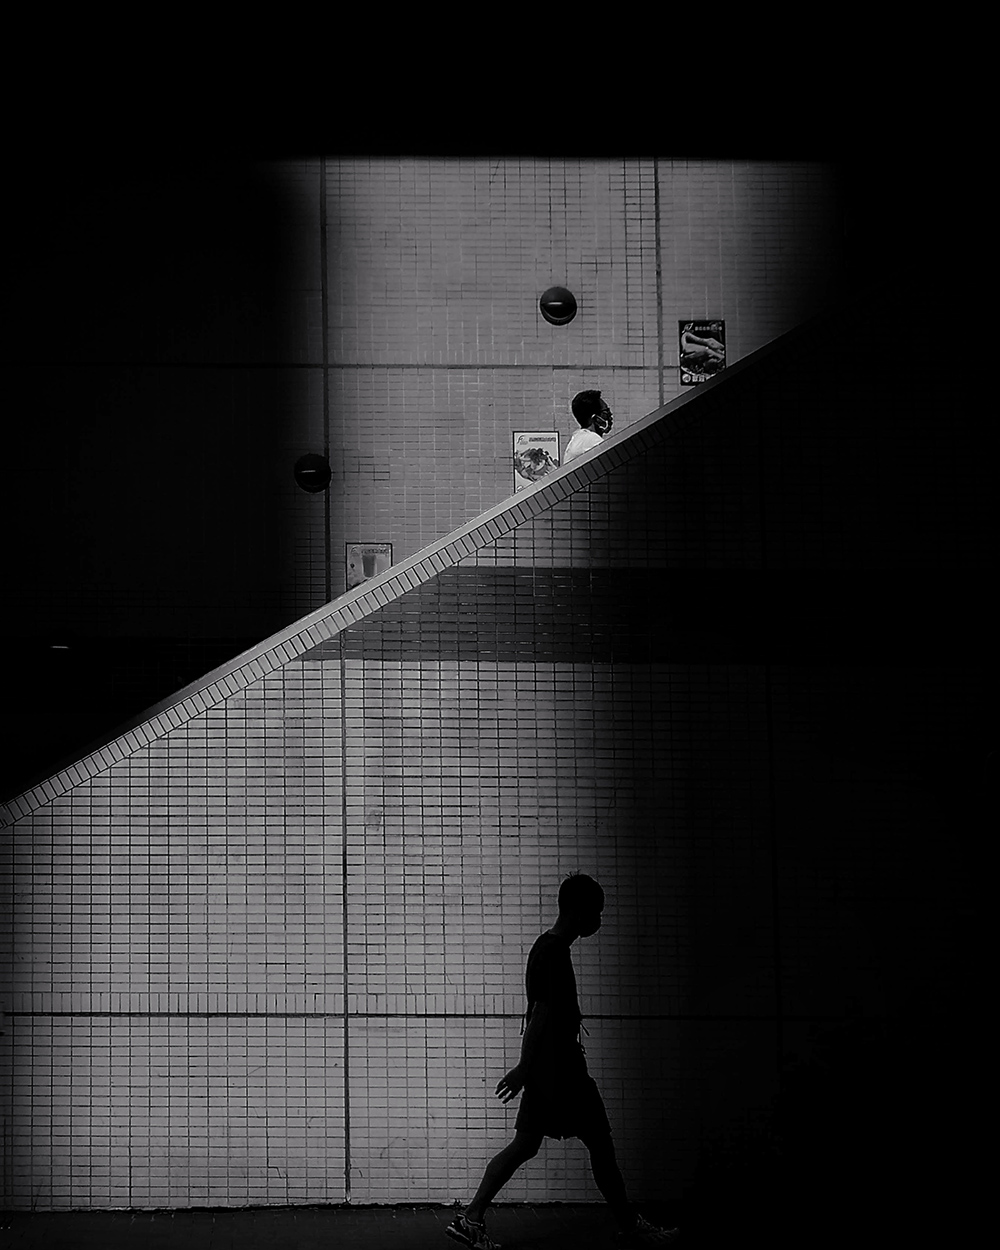 Same time! by Wai Ying Kwok, 1st Place Winner, Darkness|Noir category, 2021 Mobile Photography Awards. © Wai Ying Kwok